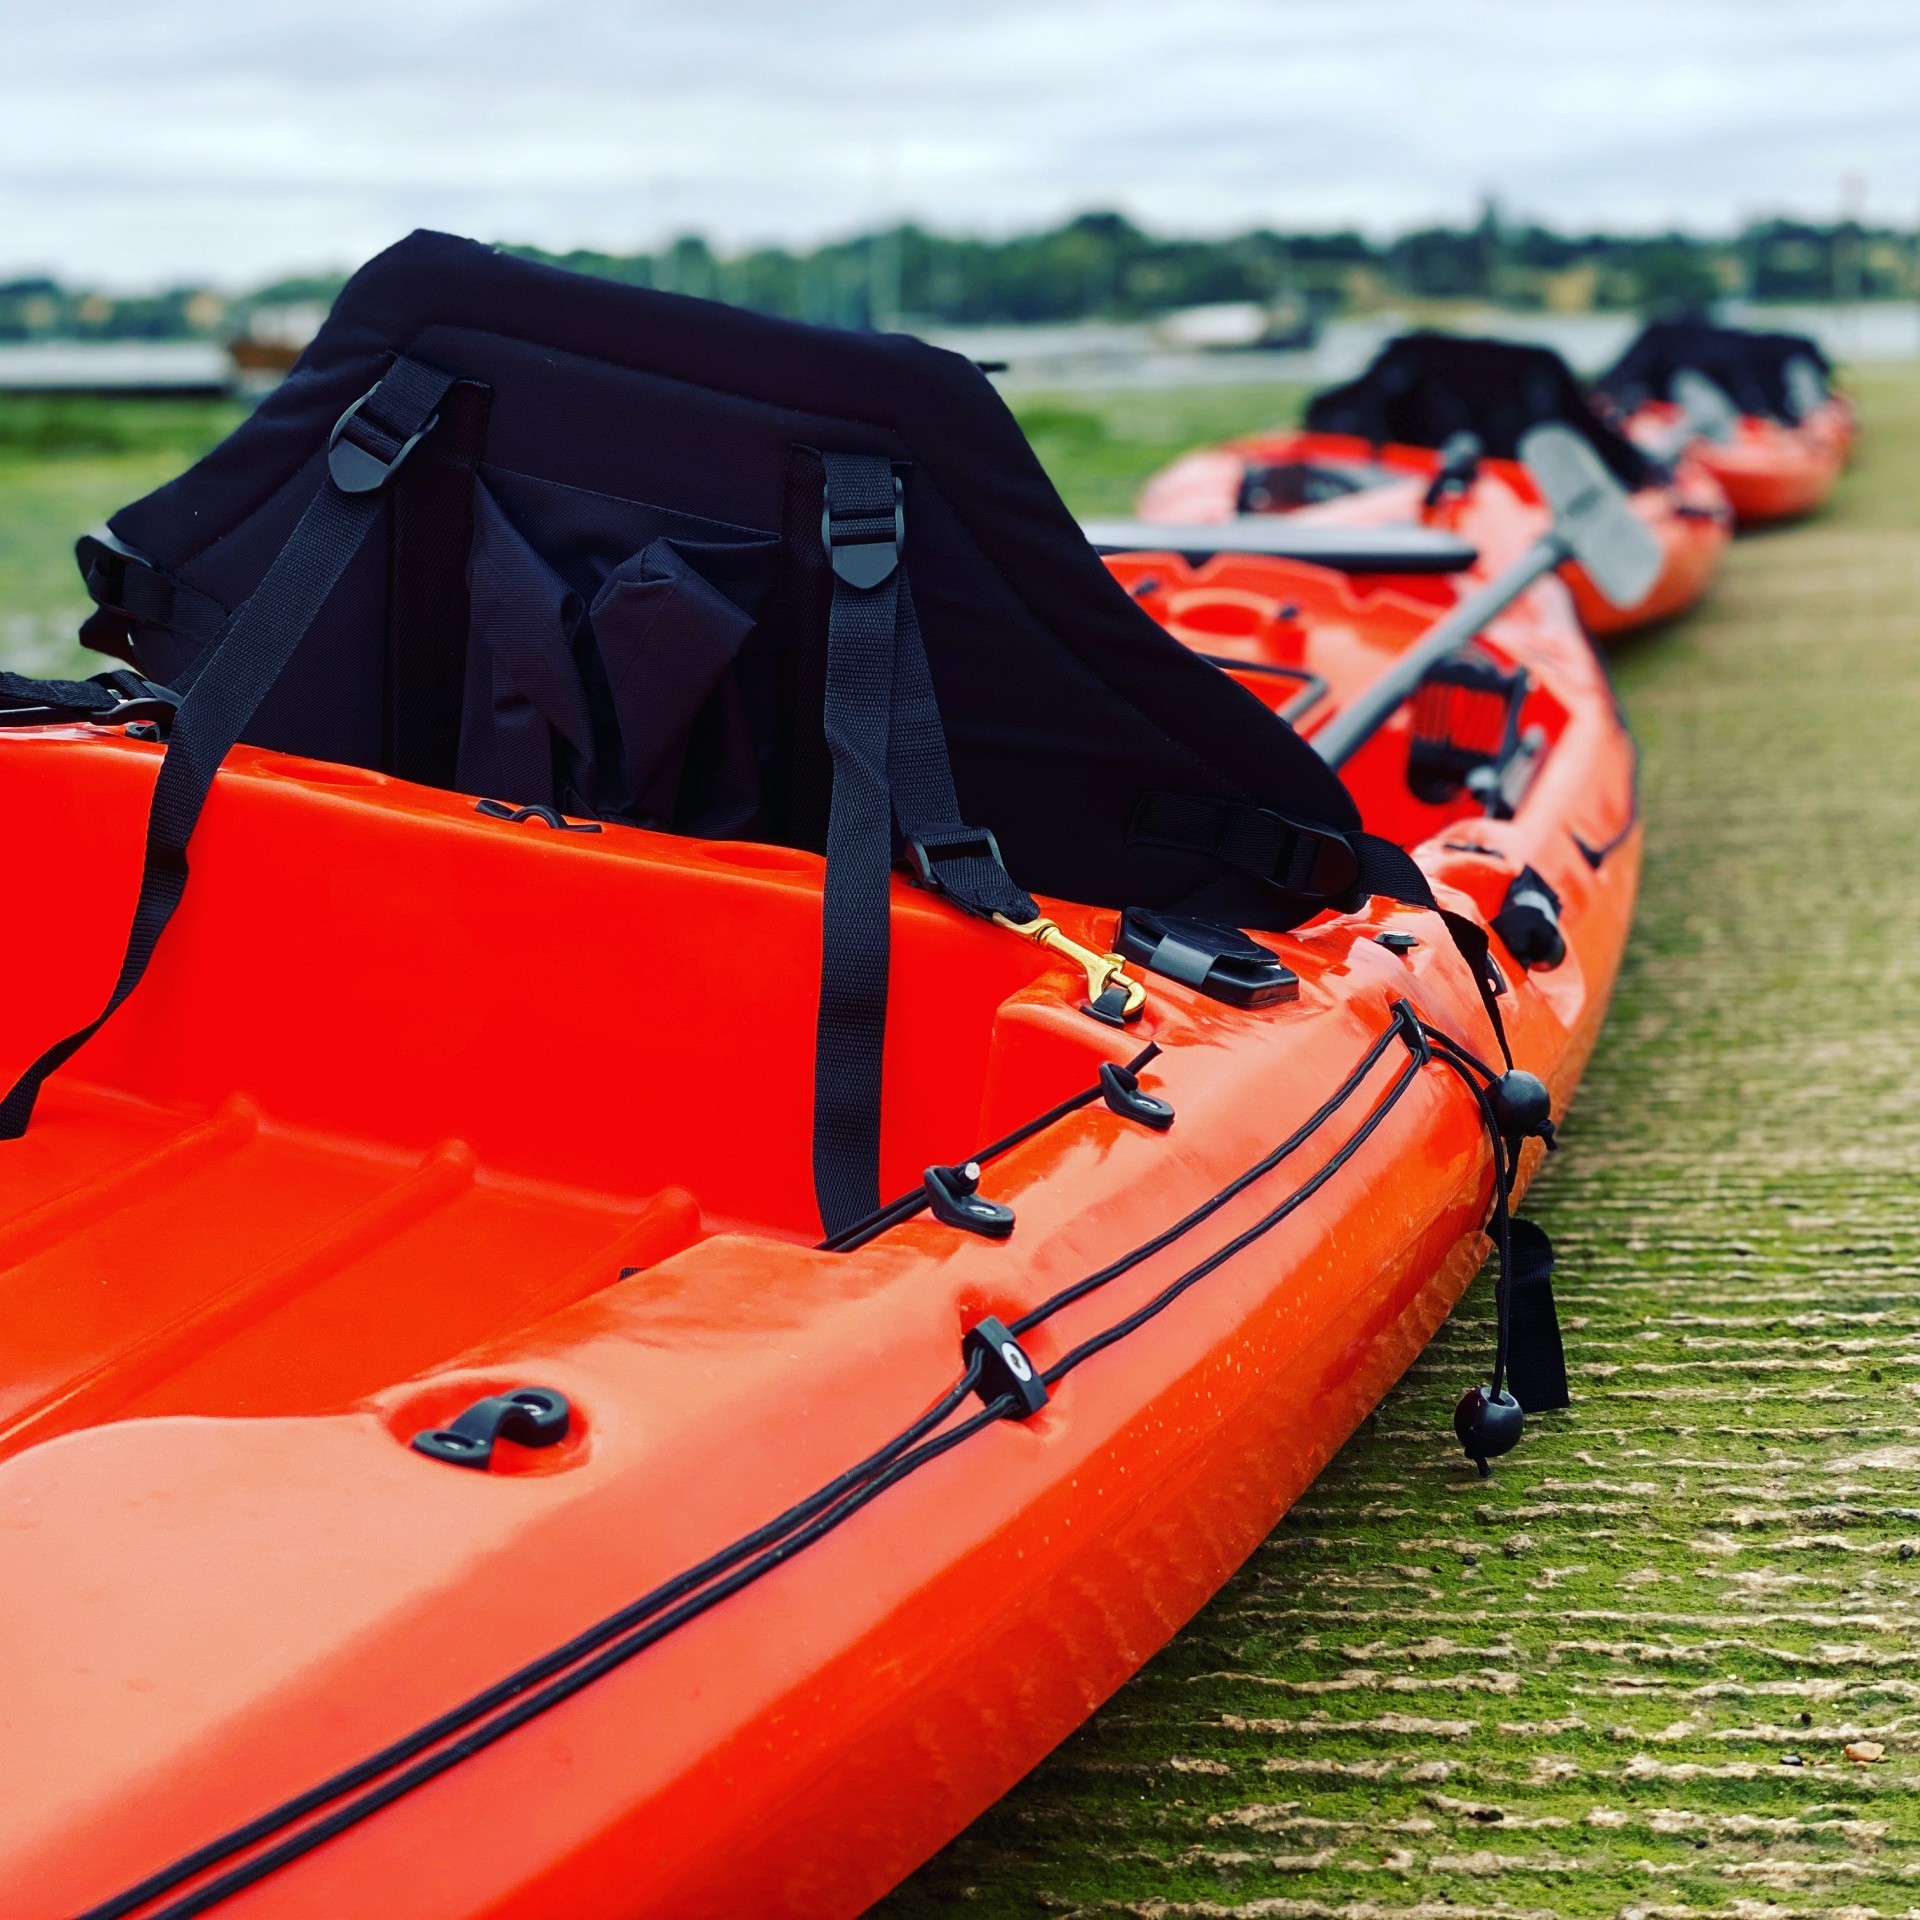 Sit-on-top kayaks with canvas seats in a long line awaiting launch